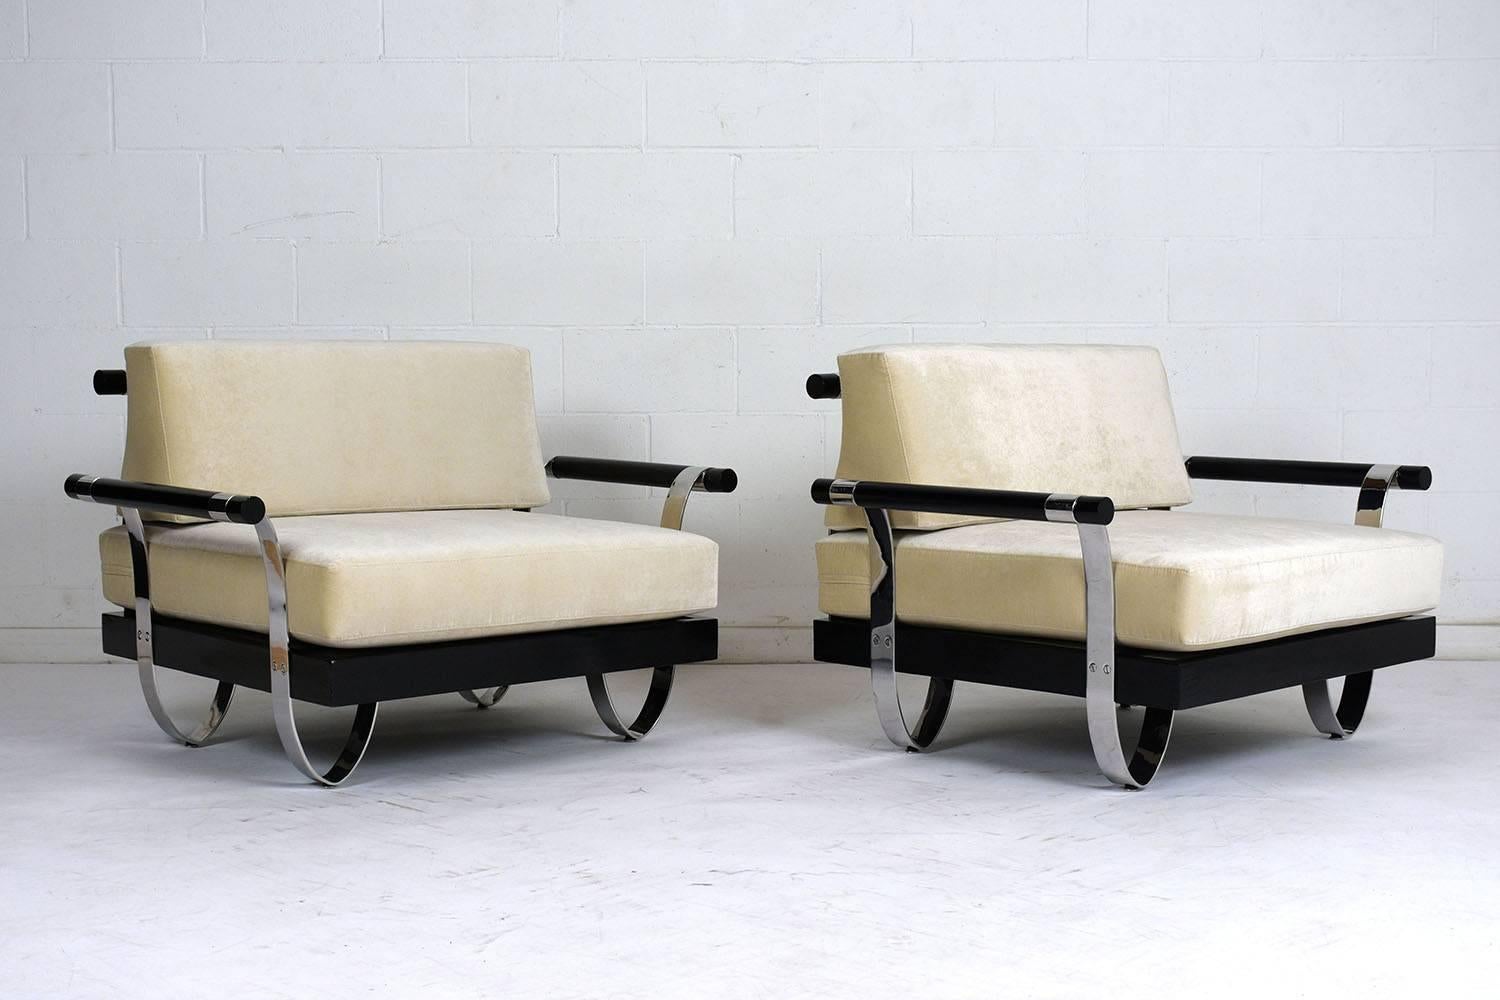 This pair of 1960s Modern-style lounge chairs features ornate polished chrome legs and back rest which are screwed on to a beautiful black finished base. The legs go up and connect with the armrest. The chairs have been professionally reupholstered